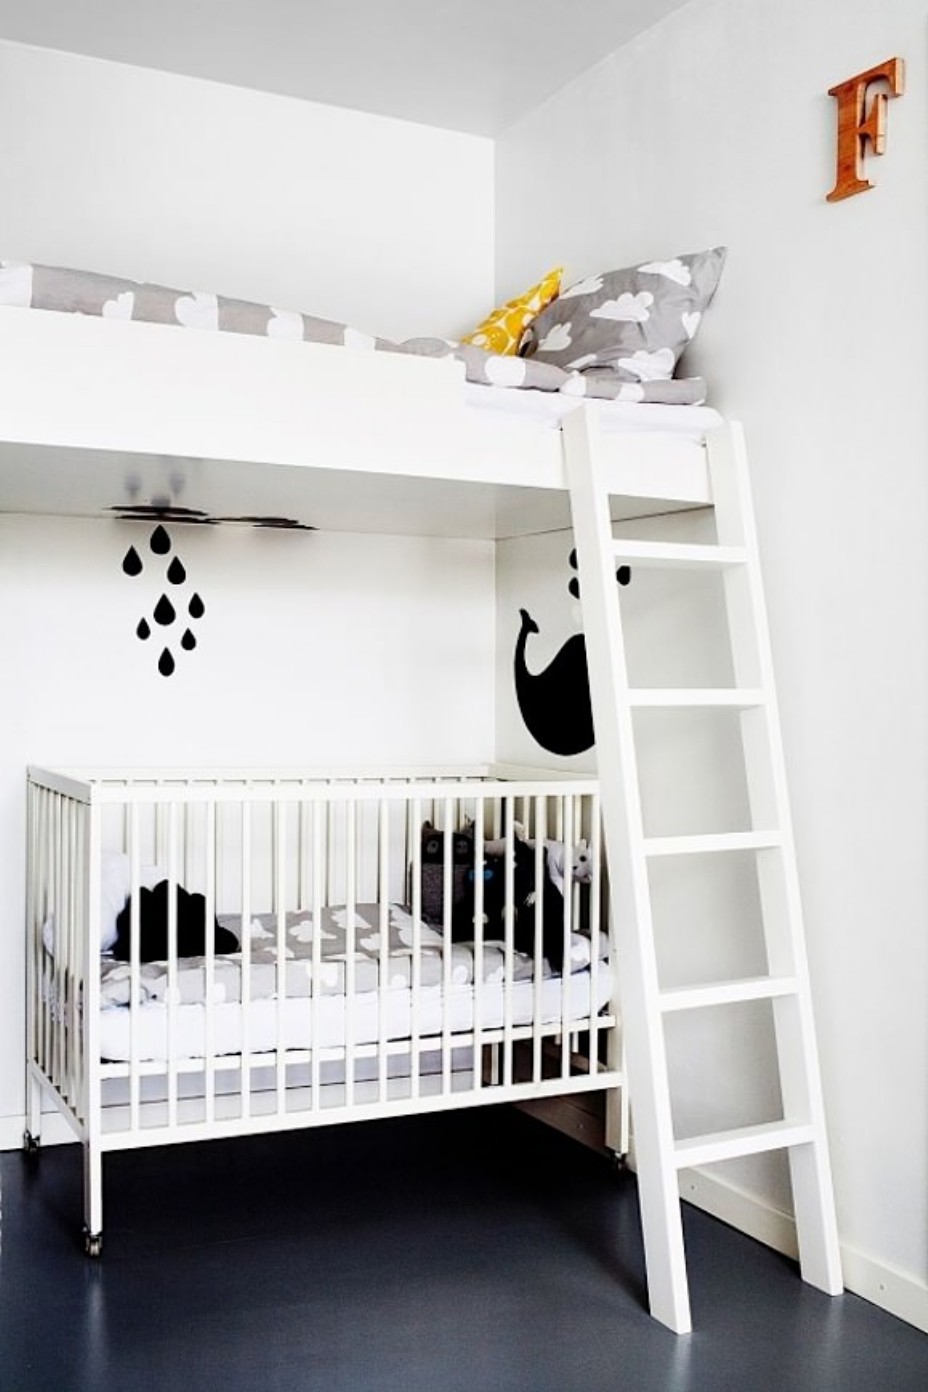 Scandinavian Kids For Cool Scandinavian Kids Room Furniture For Boys Design Ideas With Creative White Bunk Bed Ideas With Simple White Cradles Design And White Wall Paint Colors For Small Bedroom Idea Also Wall Sticker Furniture Composing The Special Type Of Kids Room Furniture